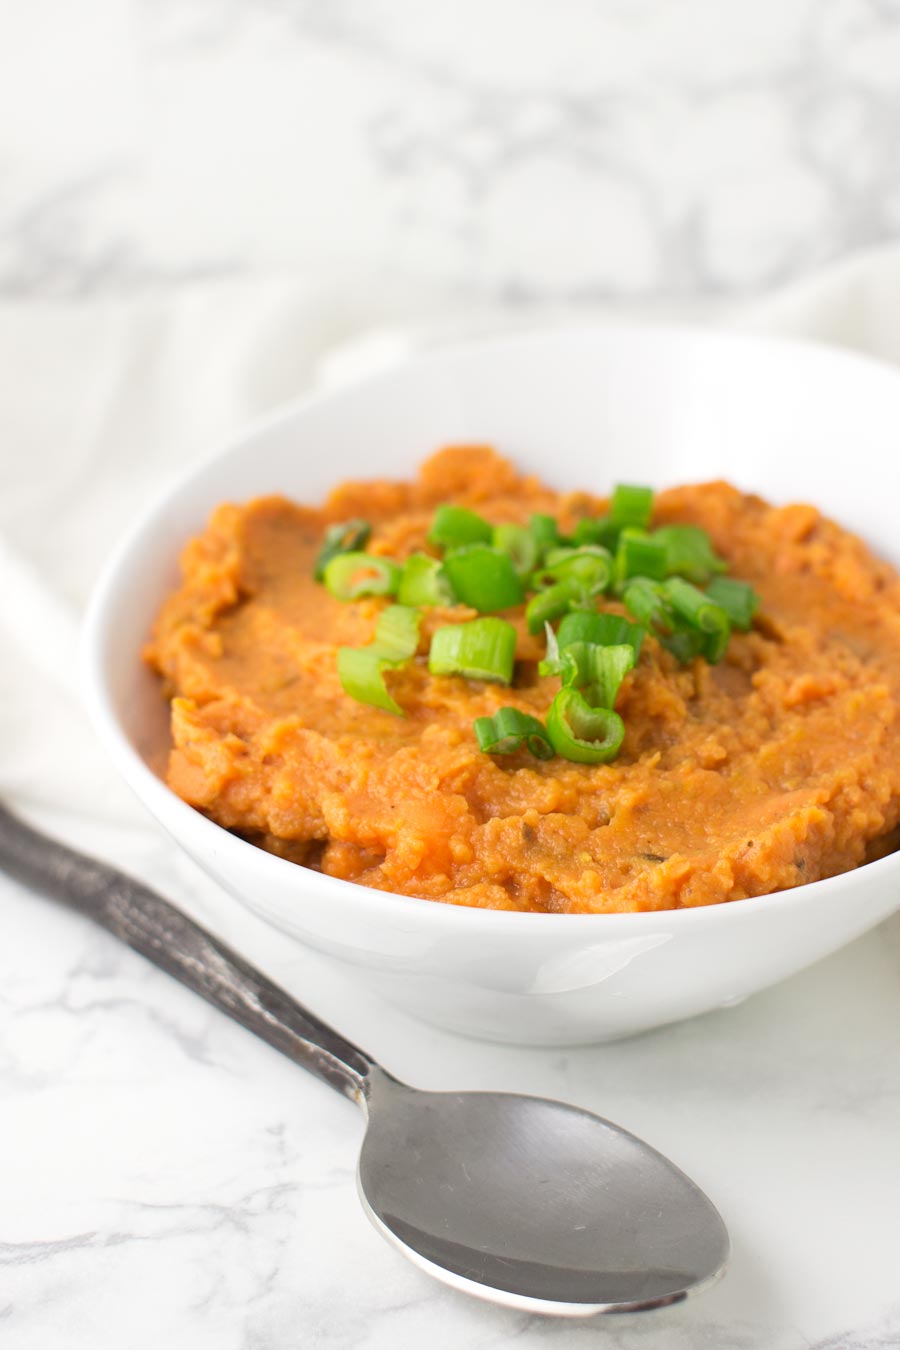 Mashed Sweet Potatoes recipe from acleanplate.com #aip #paleo #glutenfree